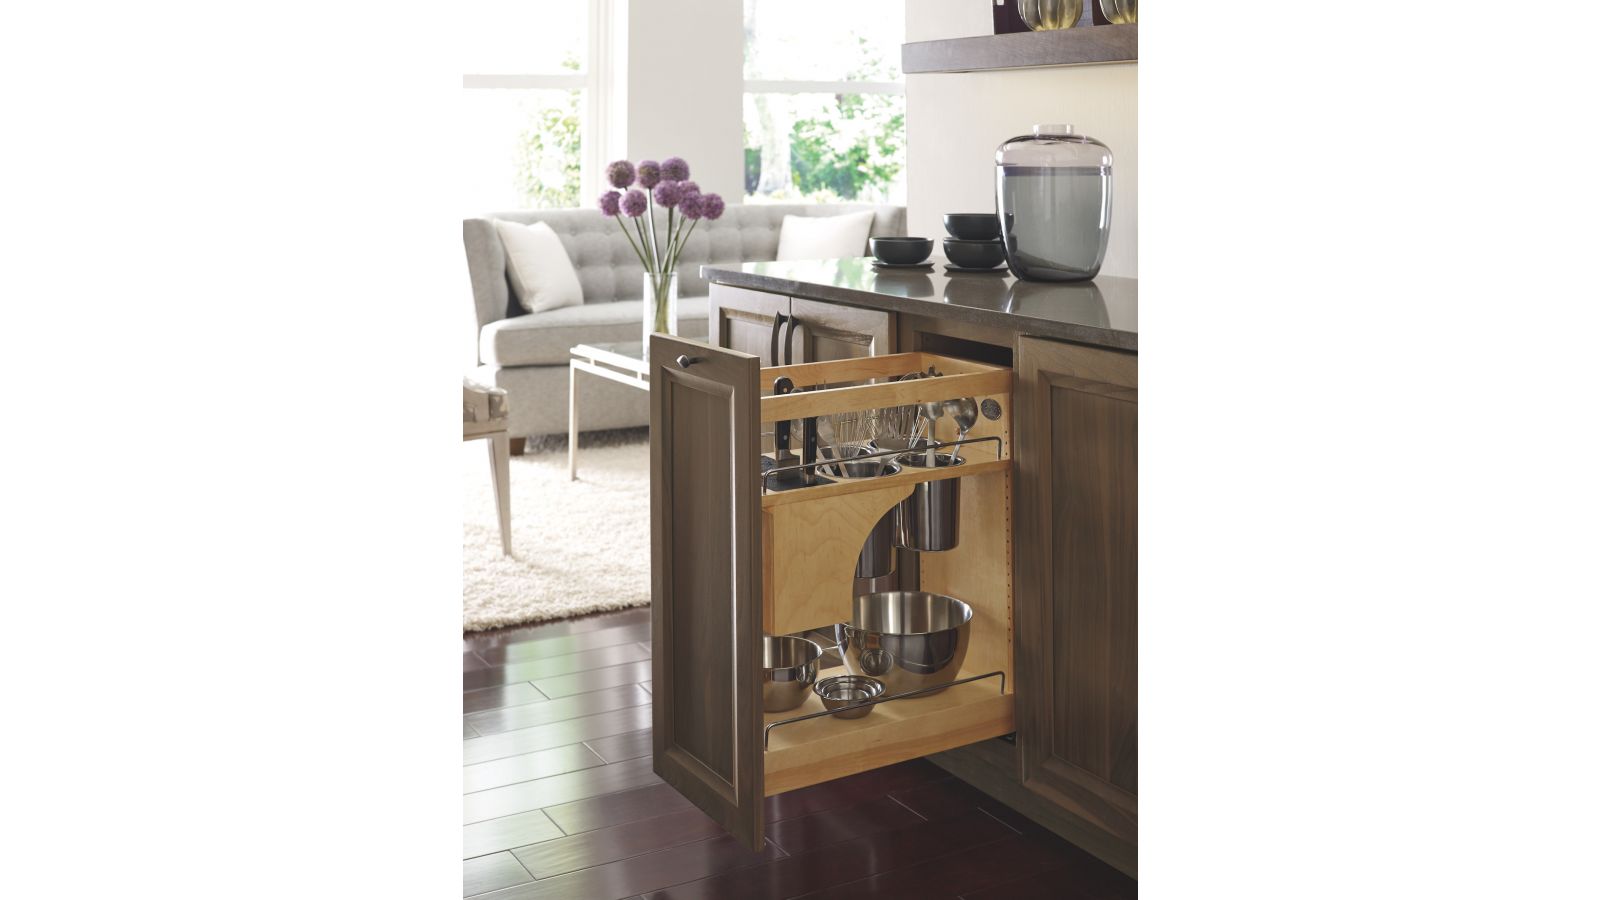 Omega Cabinetry Base Utensil Pullout with Self-Healing Knife Block